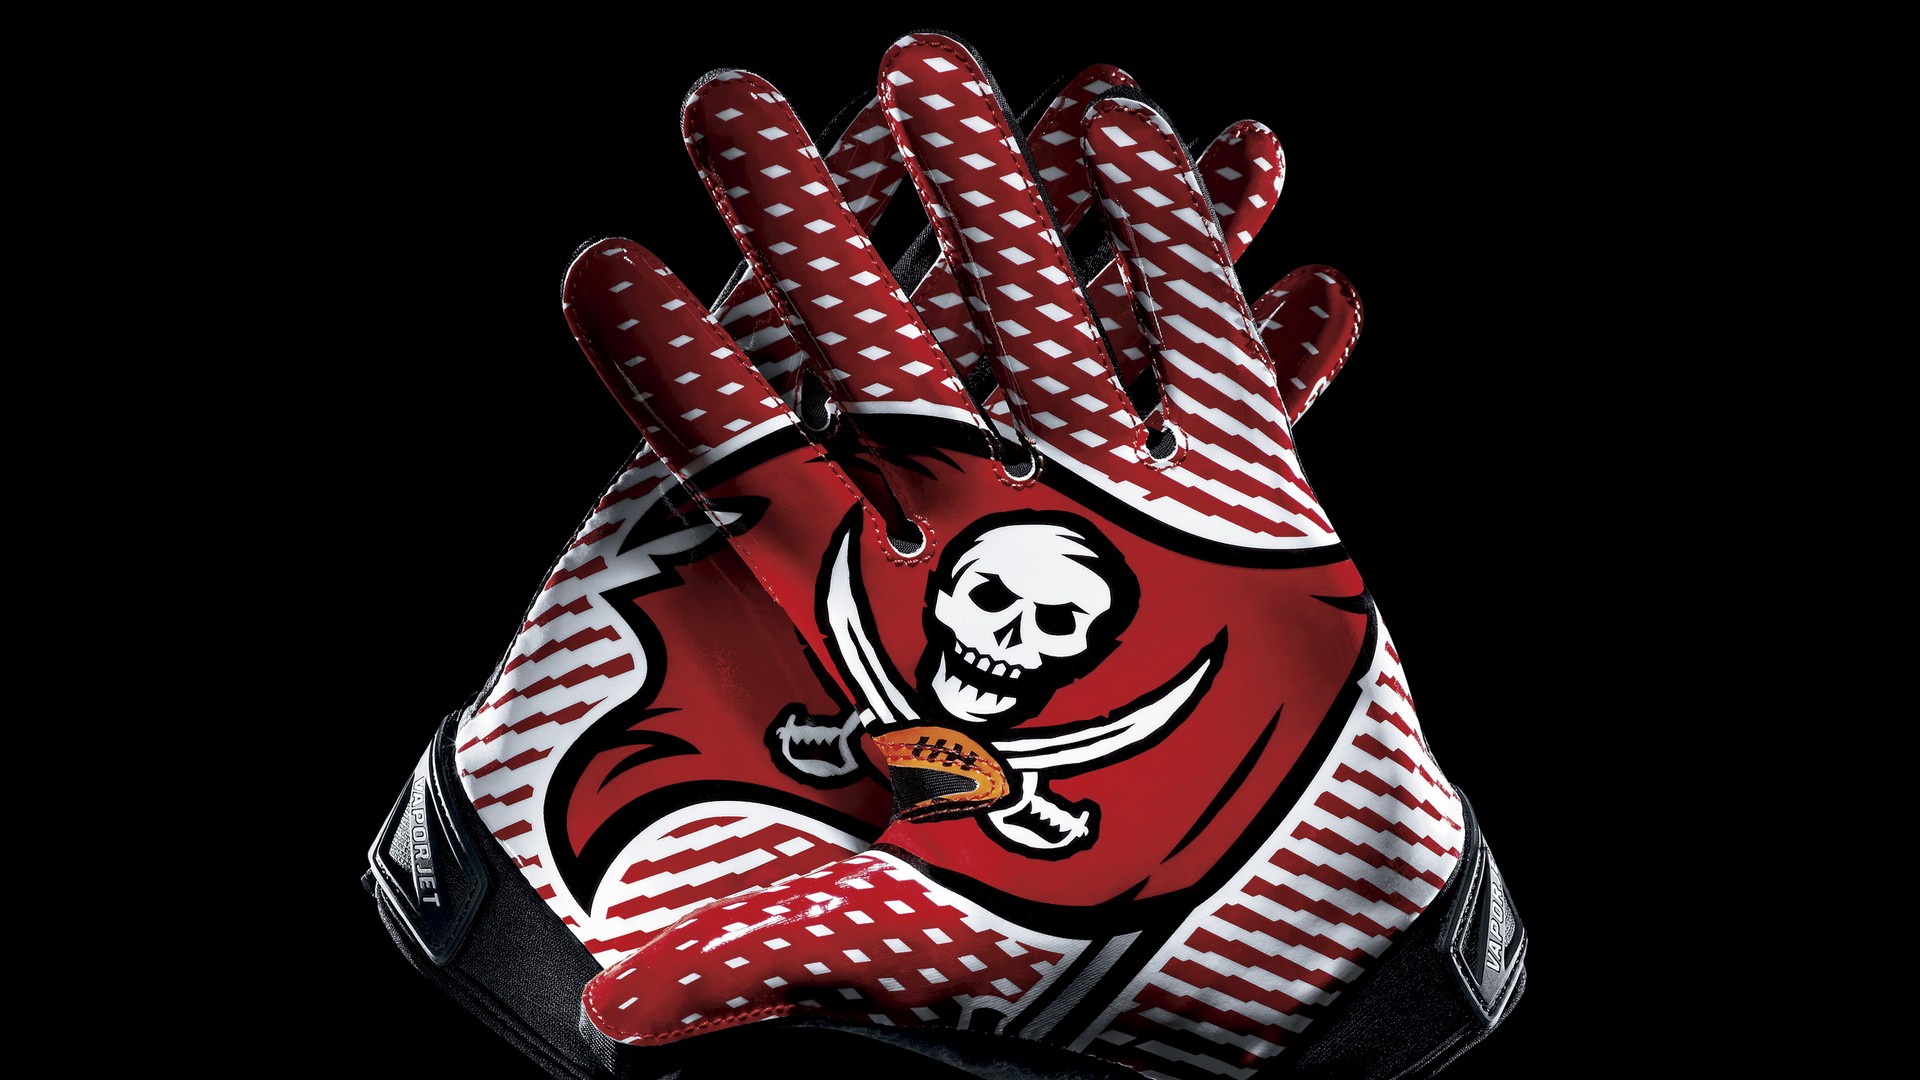 Tampa Bay Buccaneers Desktop Wallpapers With high-resolution 1920X1080 pixel. You can use this wallpaper for your Mac or Windows Desktop Background, iPhone, Android or Tablet and another Smartphone device